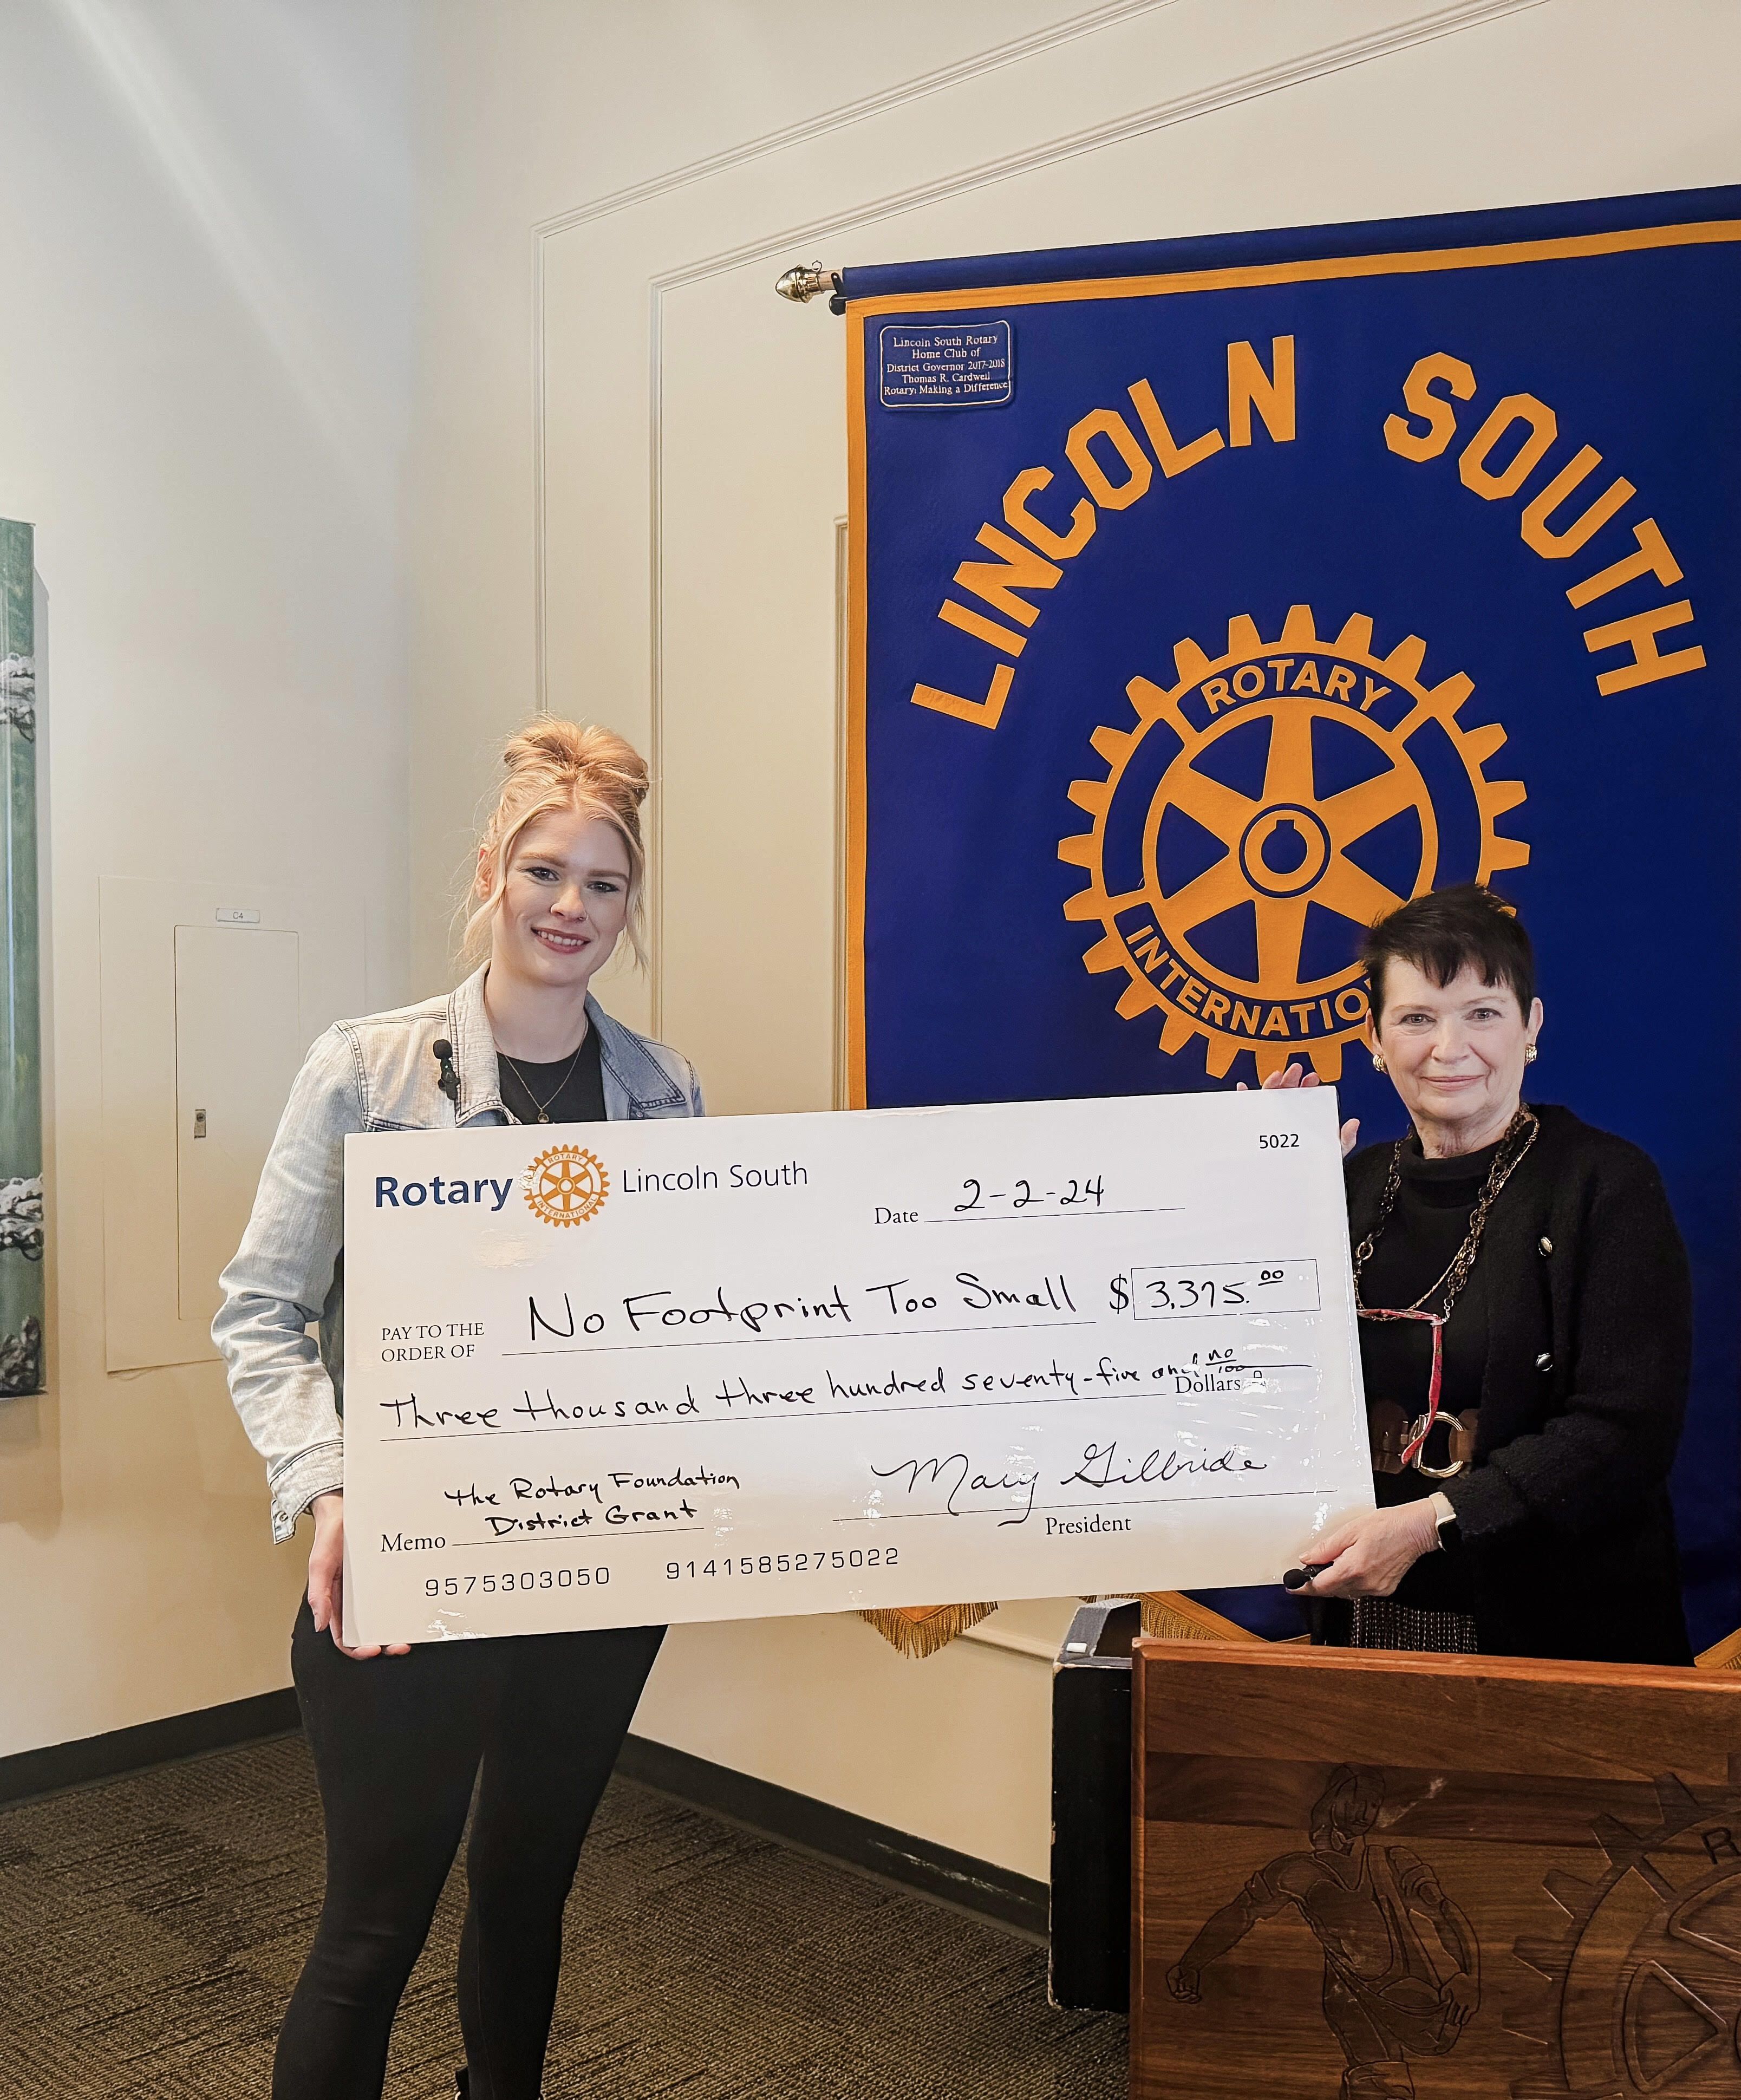 Thank you, Lincoln South Rotary!